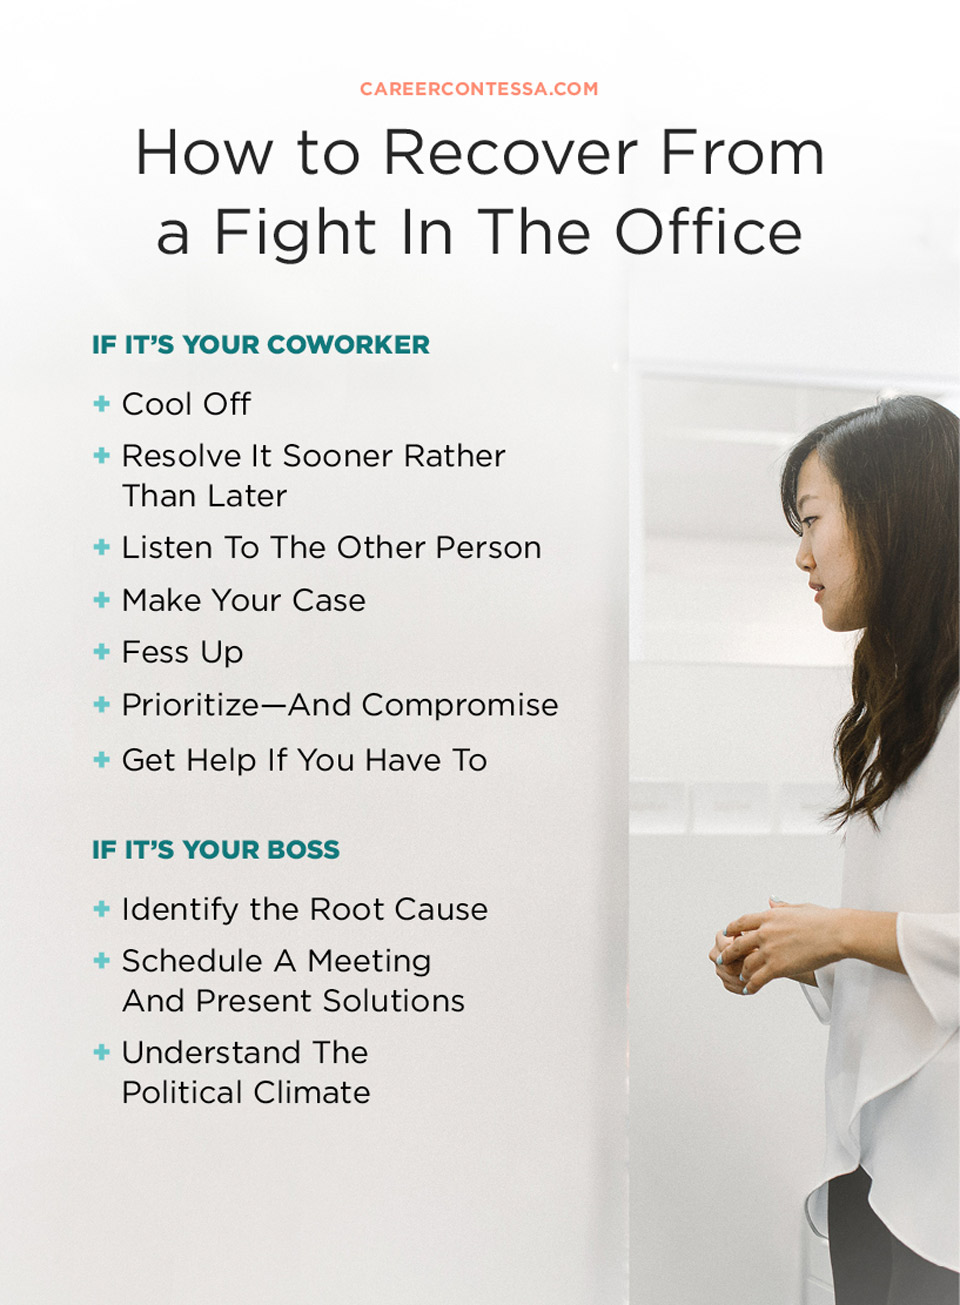 How to deal with co-worker conflicts in the workplace